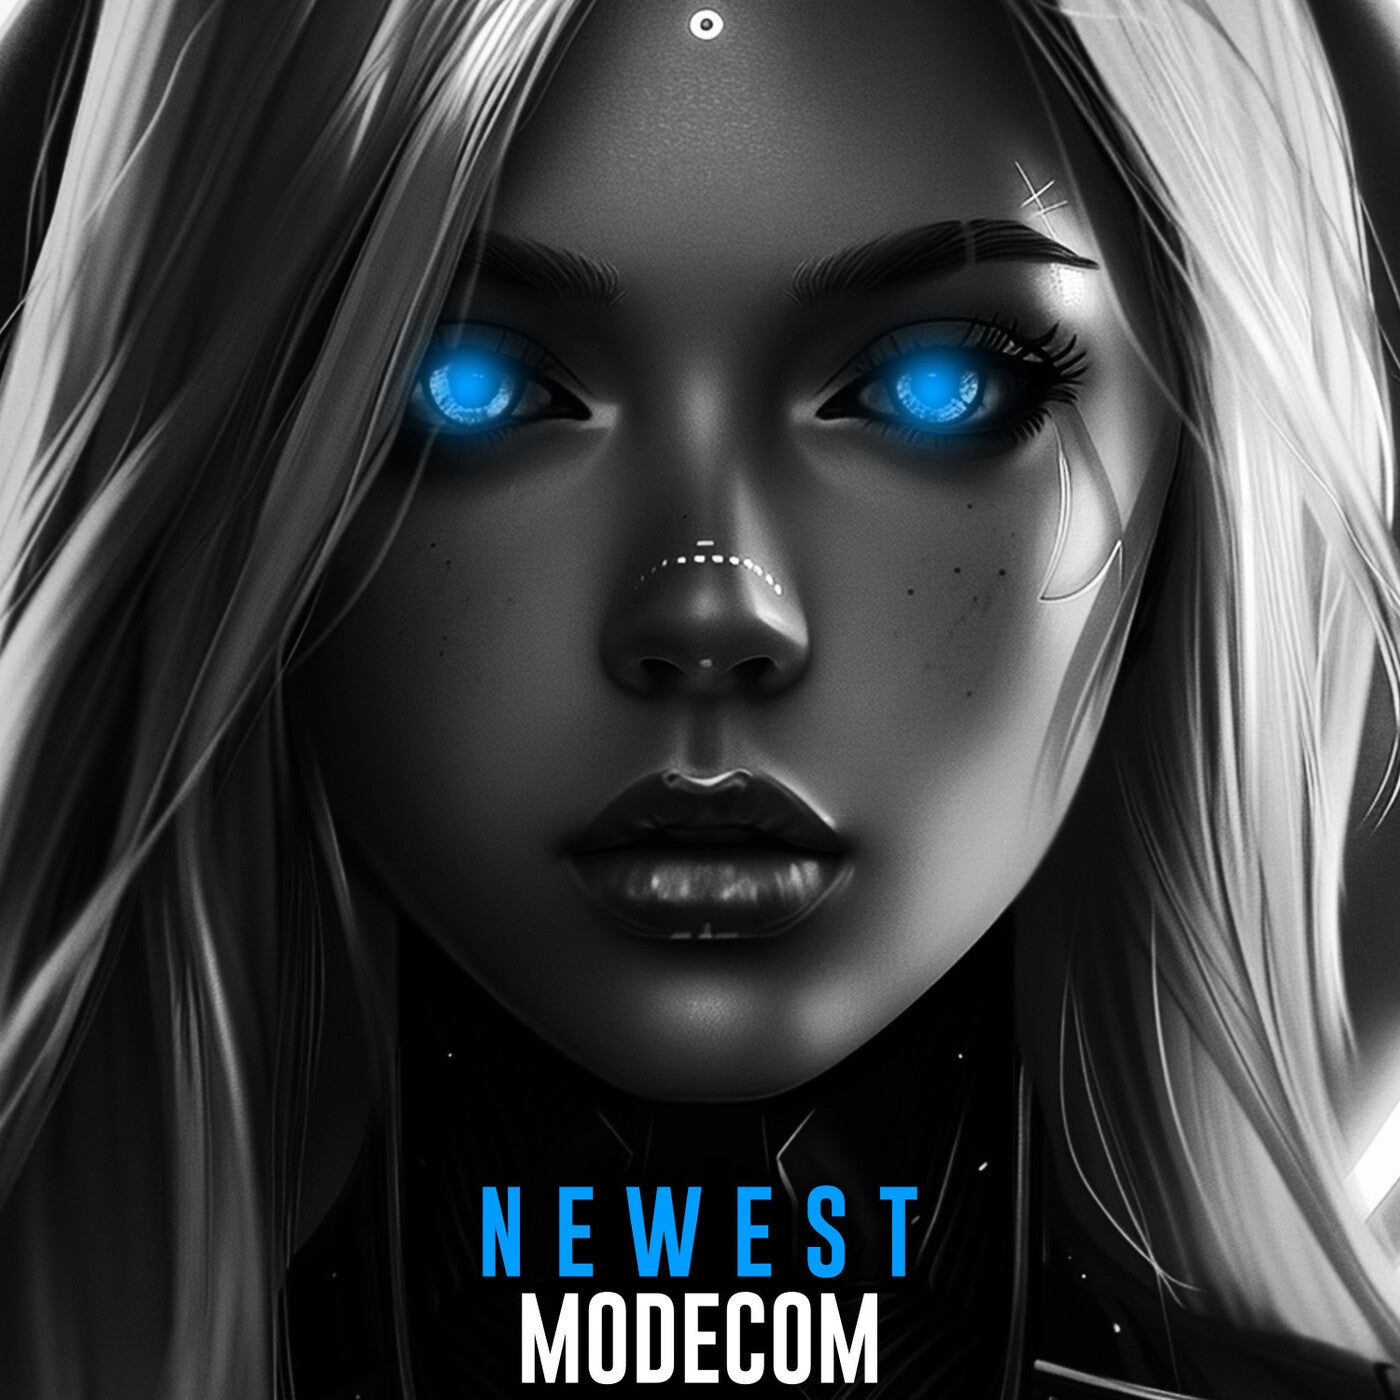 image cover: Newest - Modecom on Trippy Cat